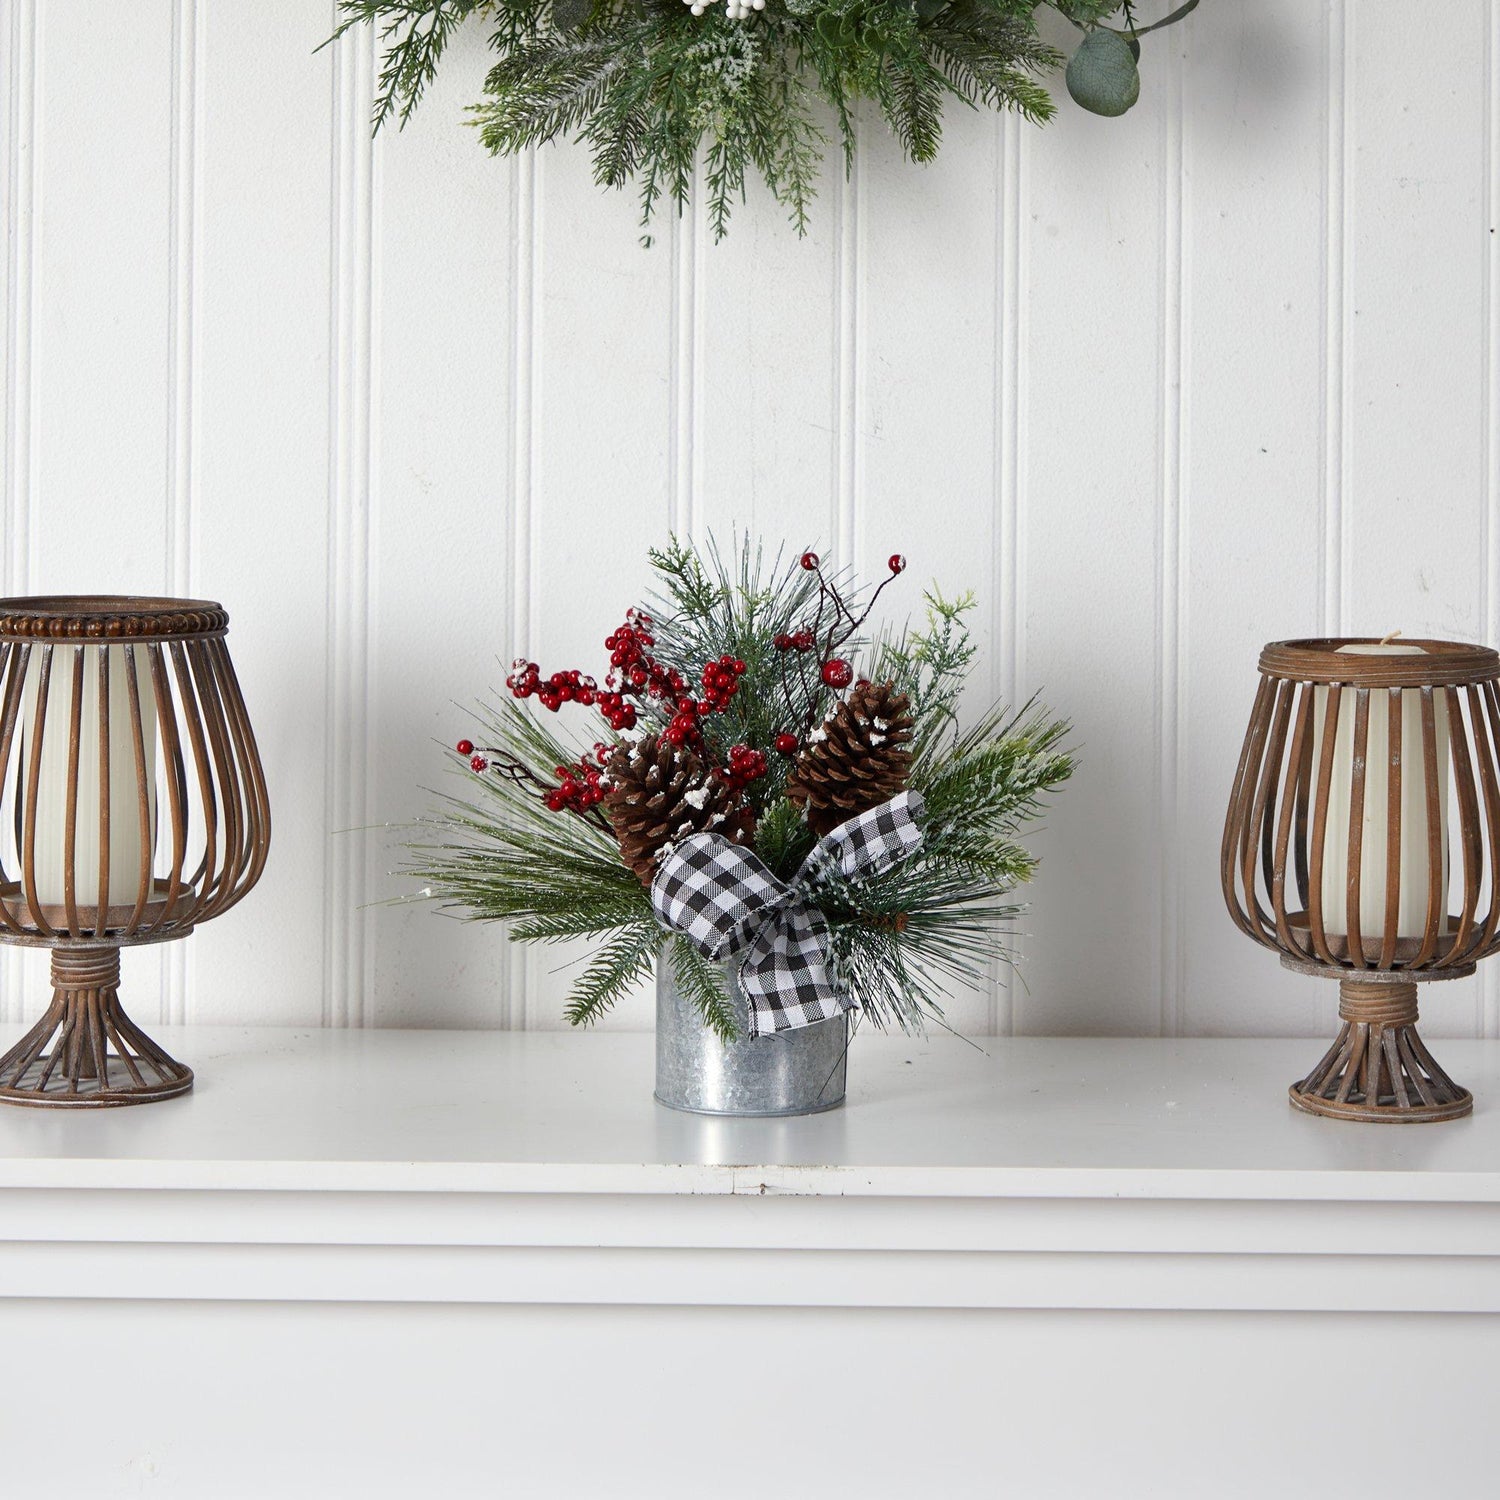 12” Frosted Pinecones and Berries Artificial Arrangement in Vase with Decorative Plaid Bow